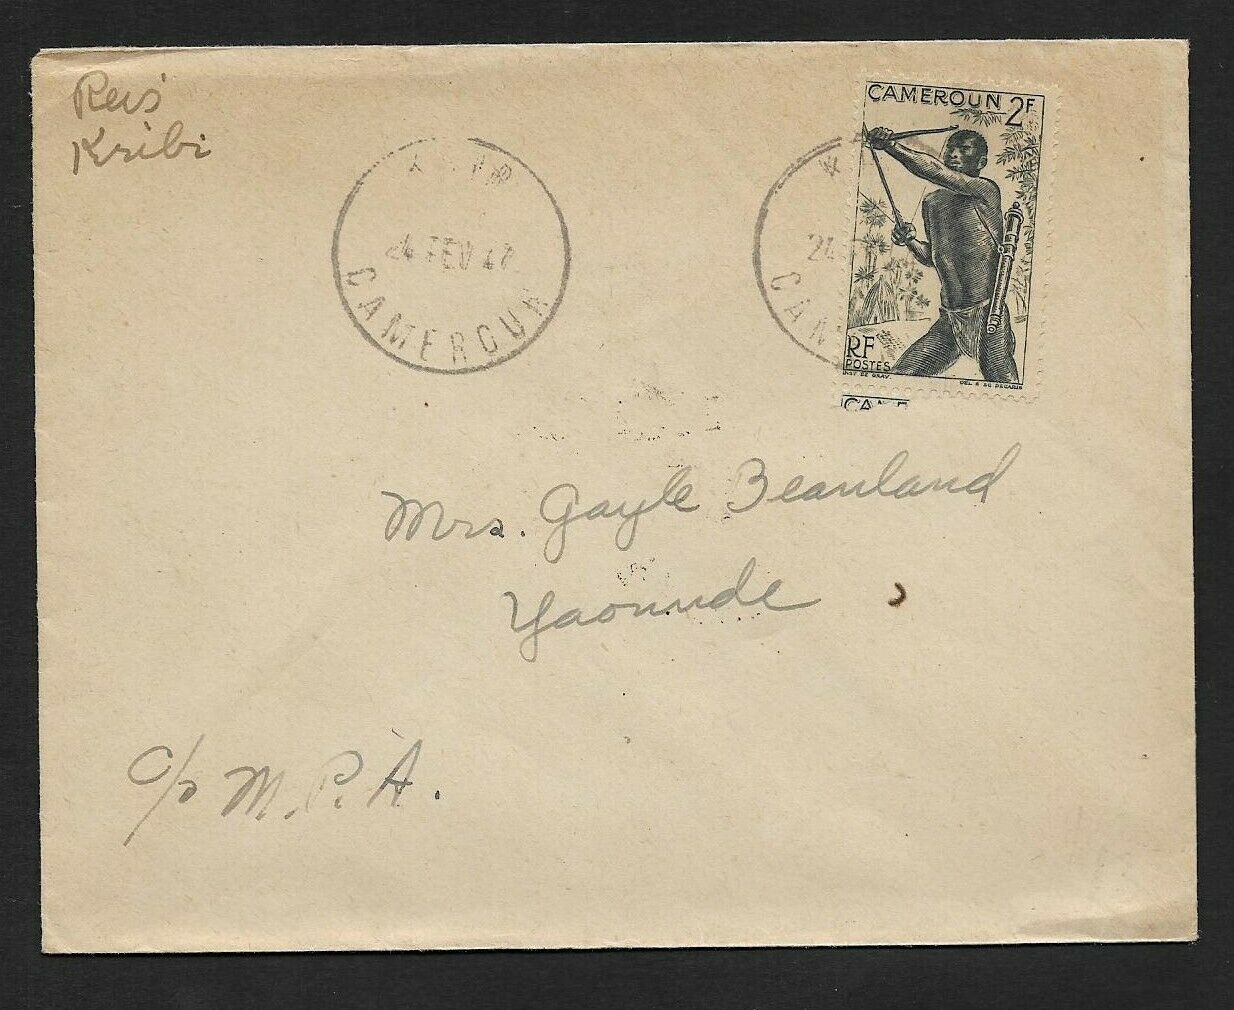 Cameroon 1947 Cover From Kiri To Usa